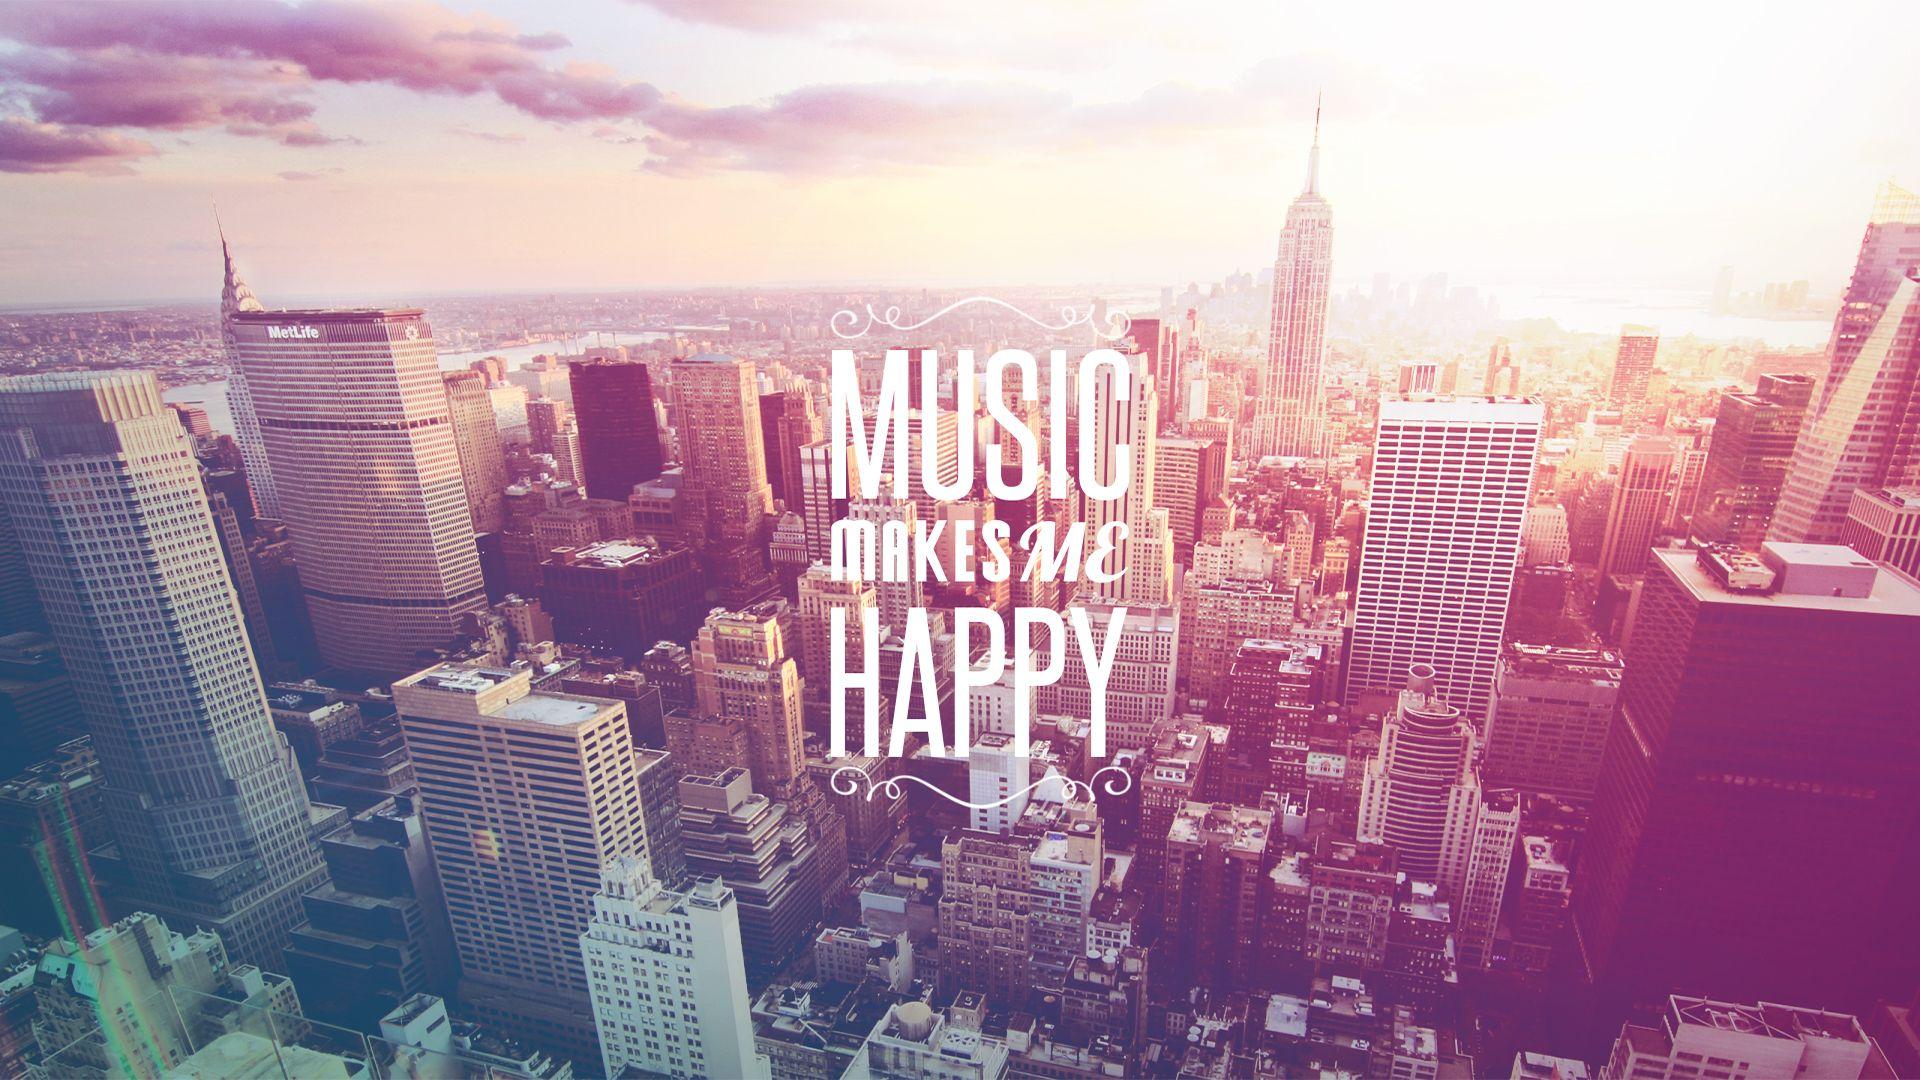 Best Music Wallpaper in High Quality, Music Background